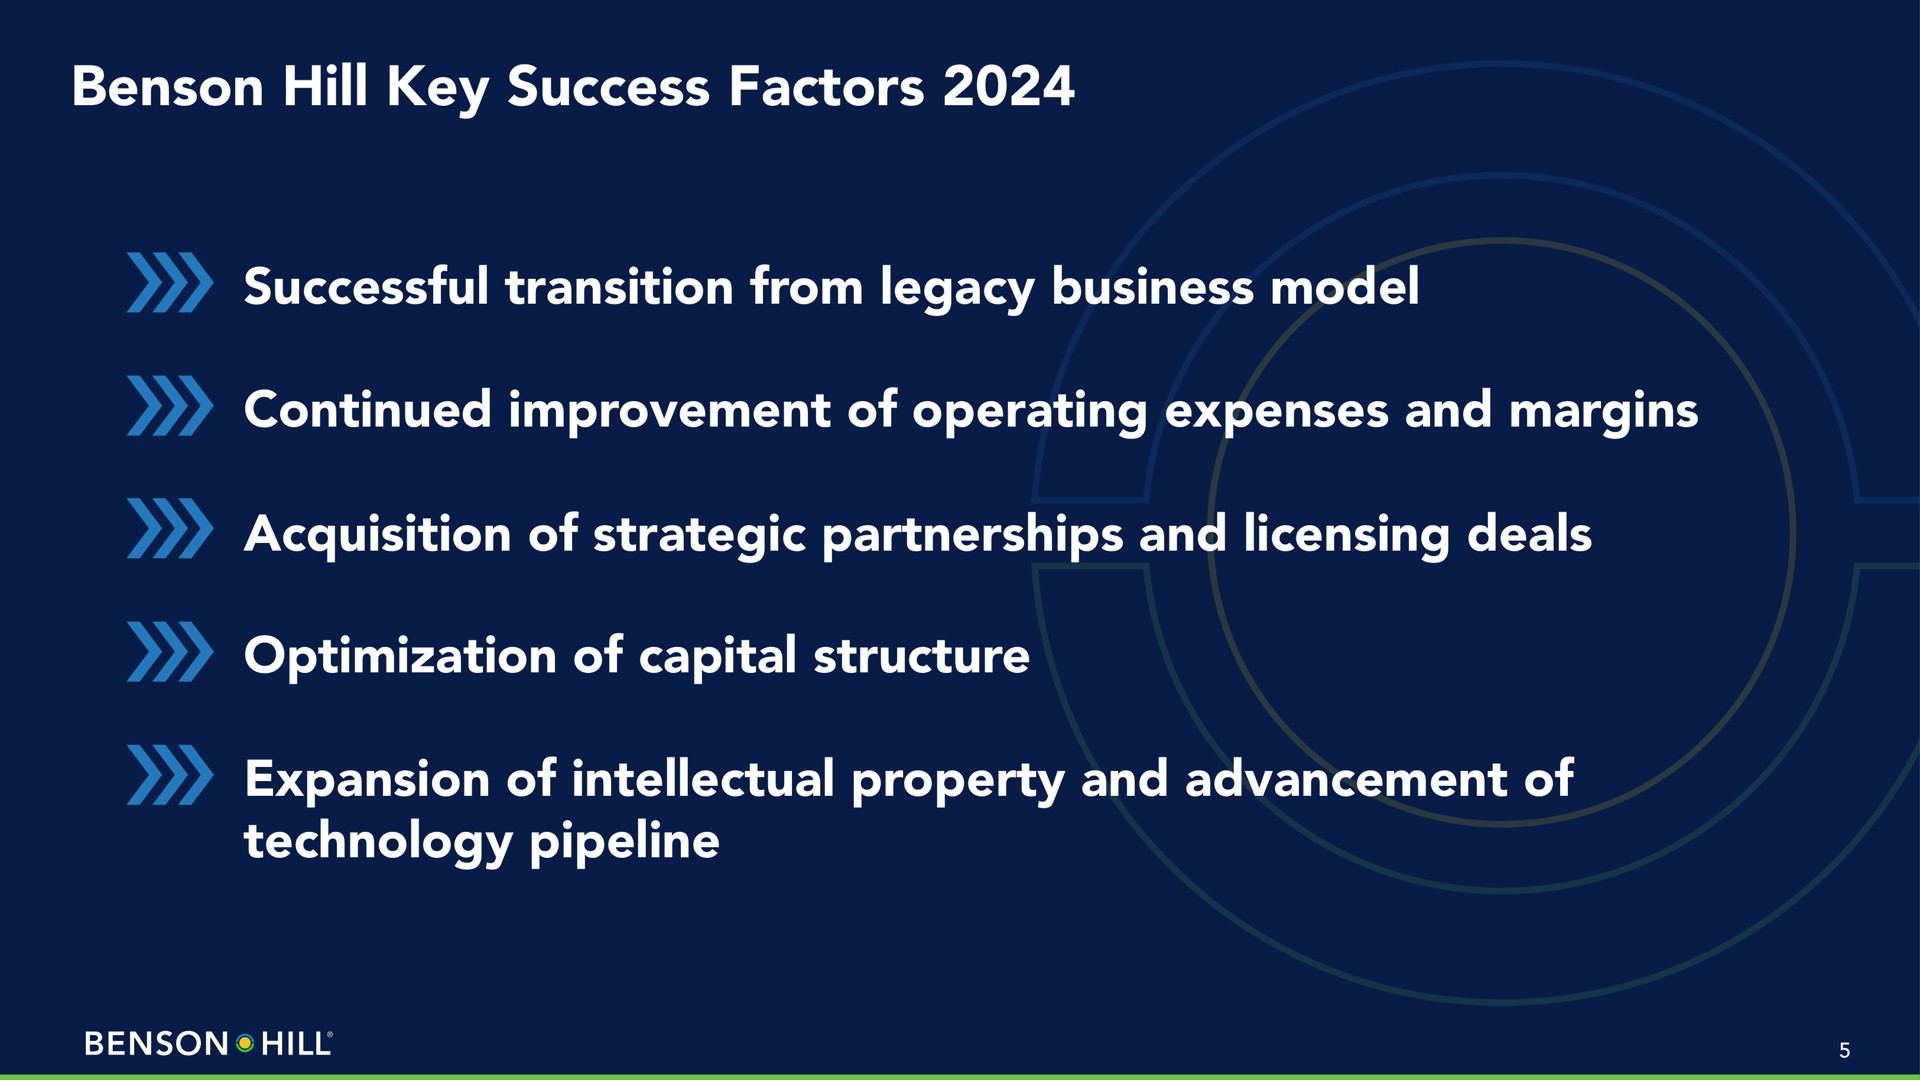 hill key success factors successful transition from legacy business model continued improvement of operating expenses and margins acquisition of strategic partnerships and licensing deals optimization of capital structure expansion of intellectual property and advancement of technology pipeline | Benson Hill